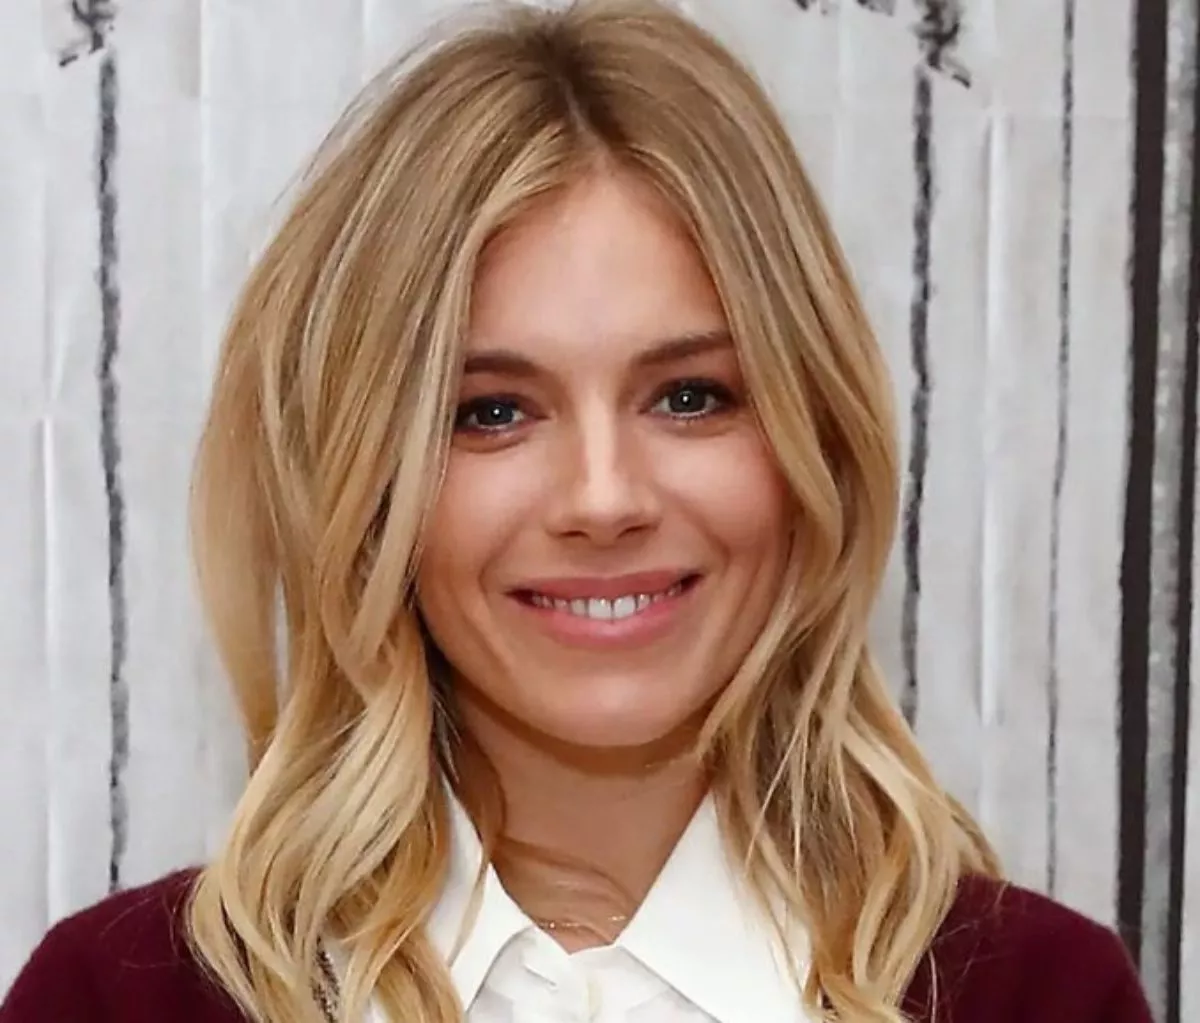 Sienna Miller wearing her blonde hair down and red and white top while smiling